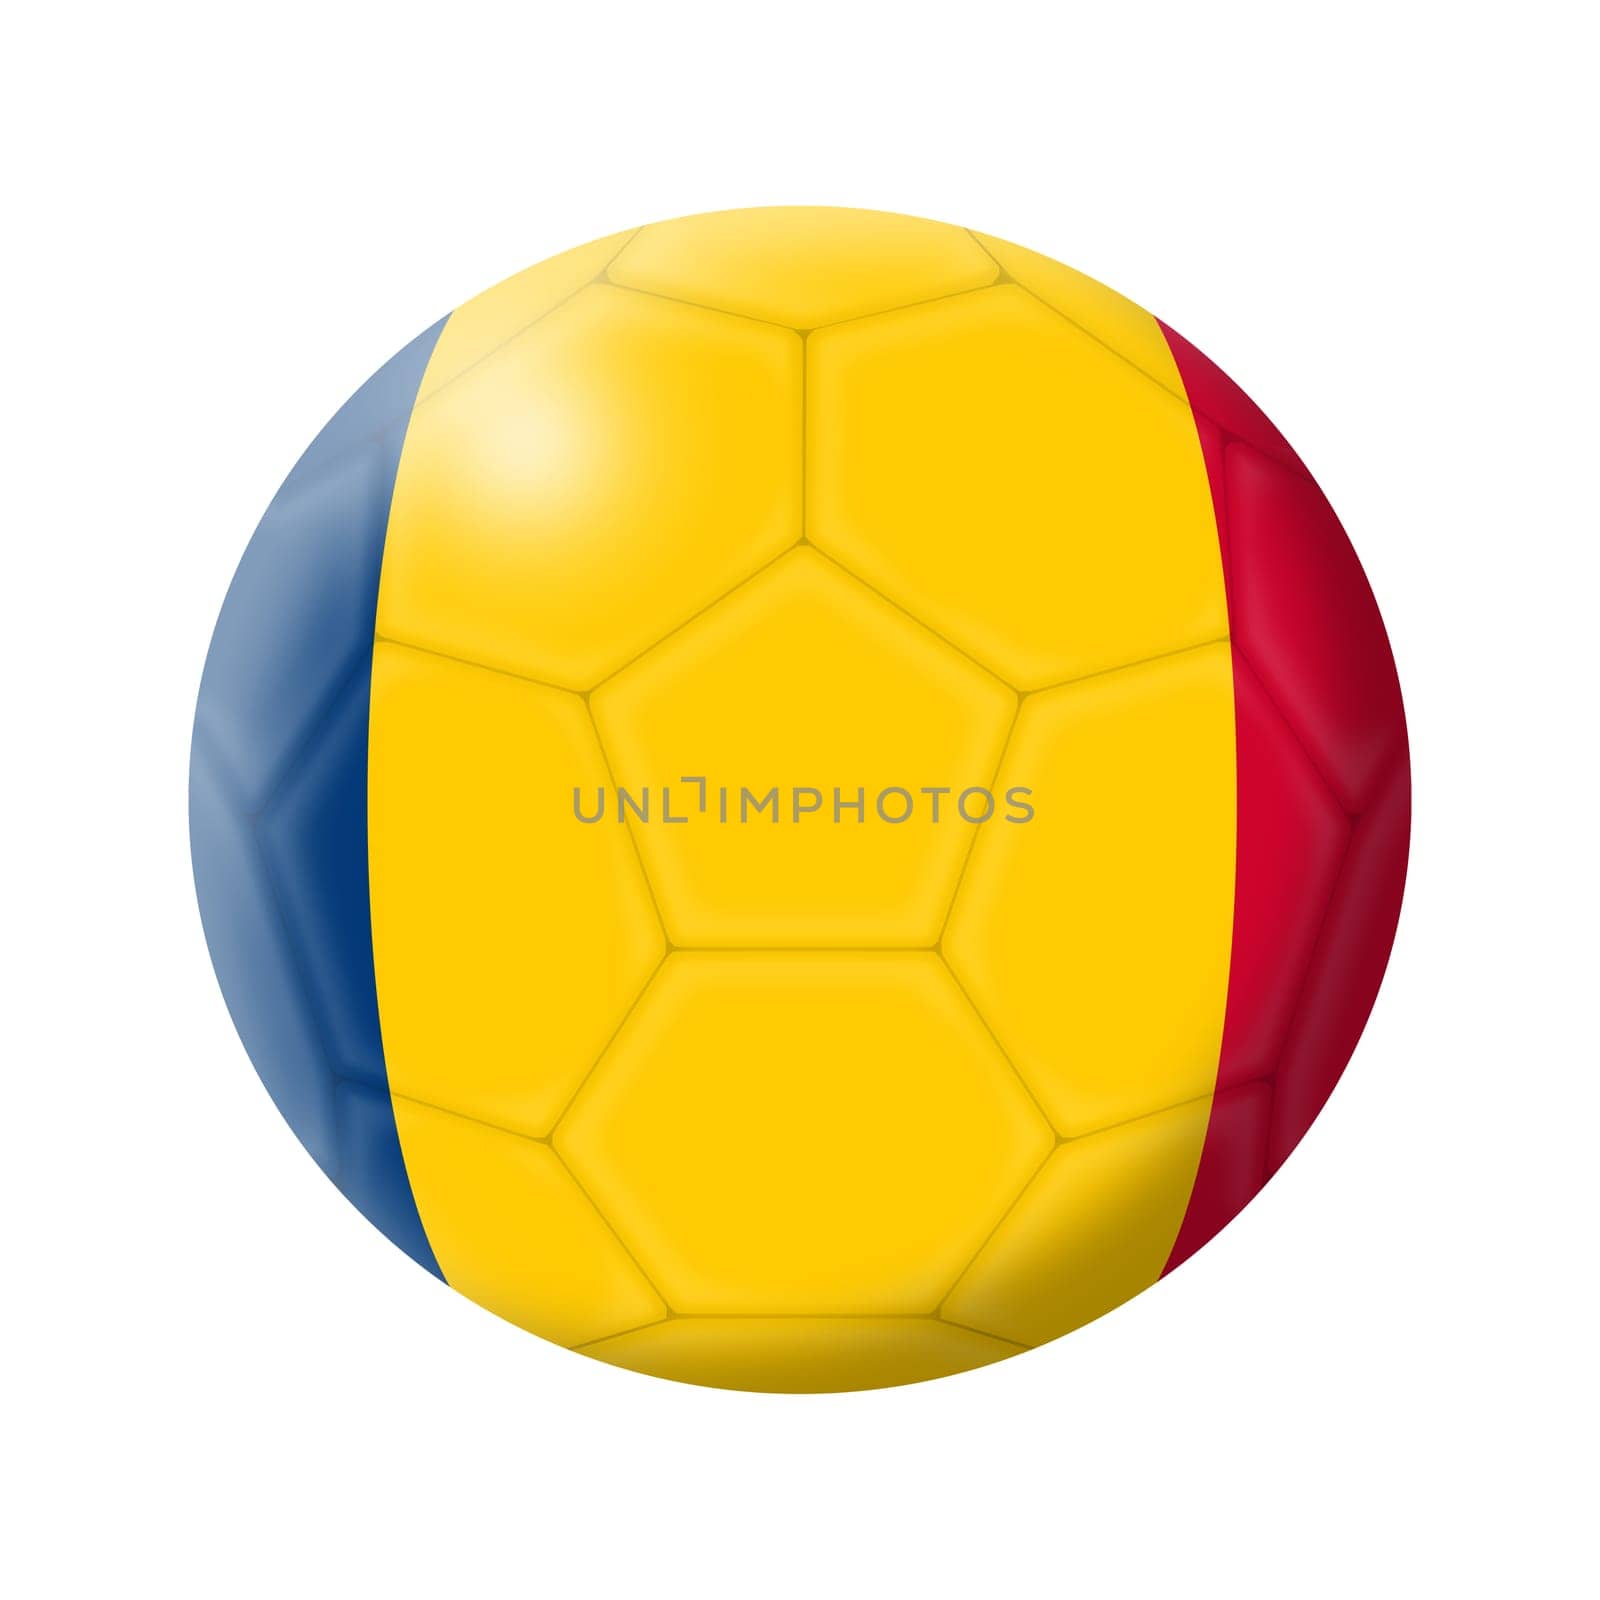 A Chad soccer ball football illustration isolated on white with clipping path